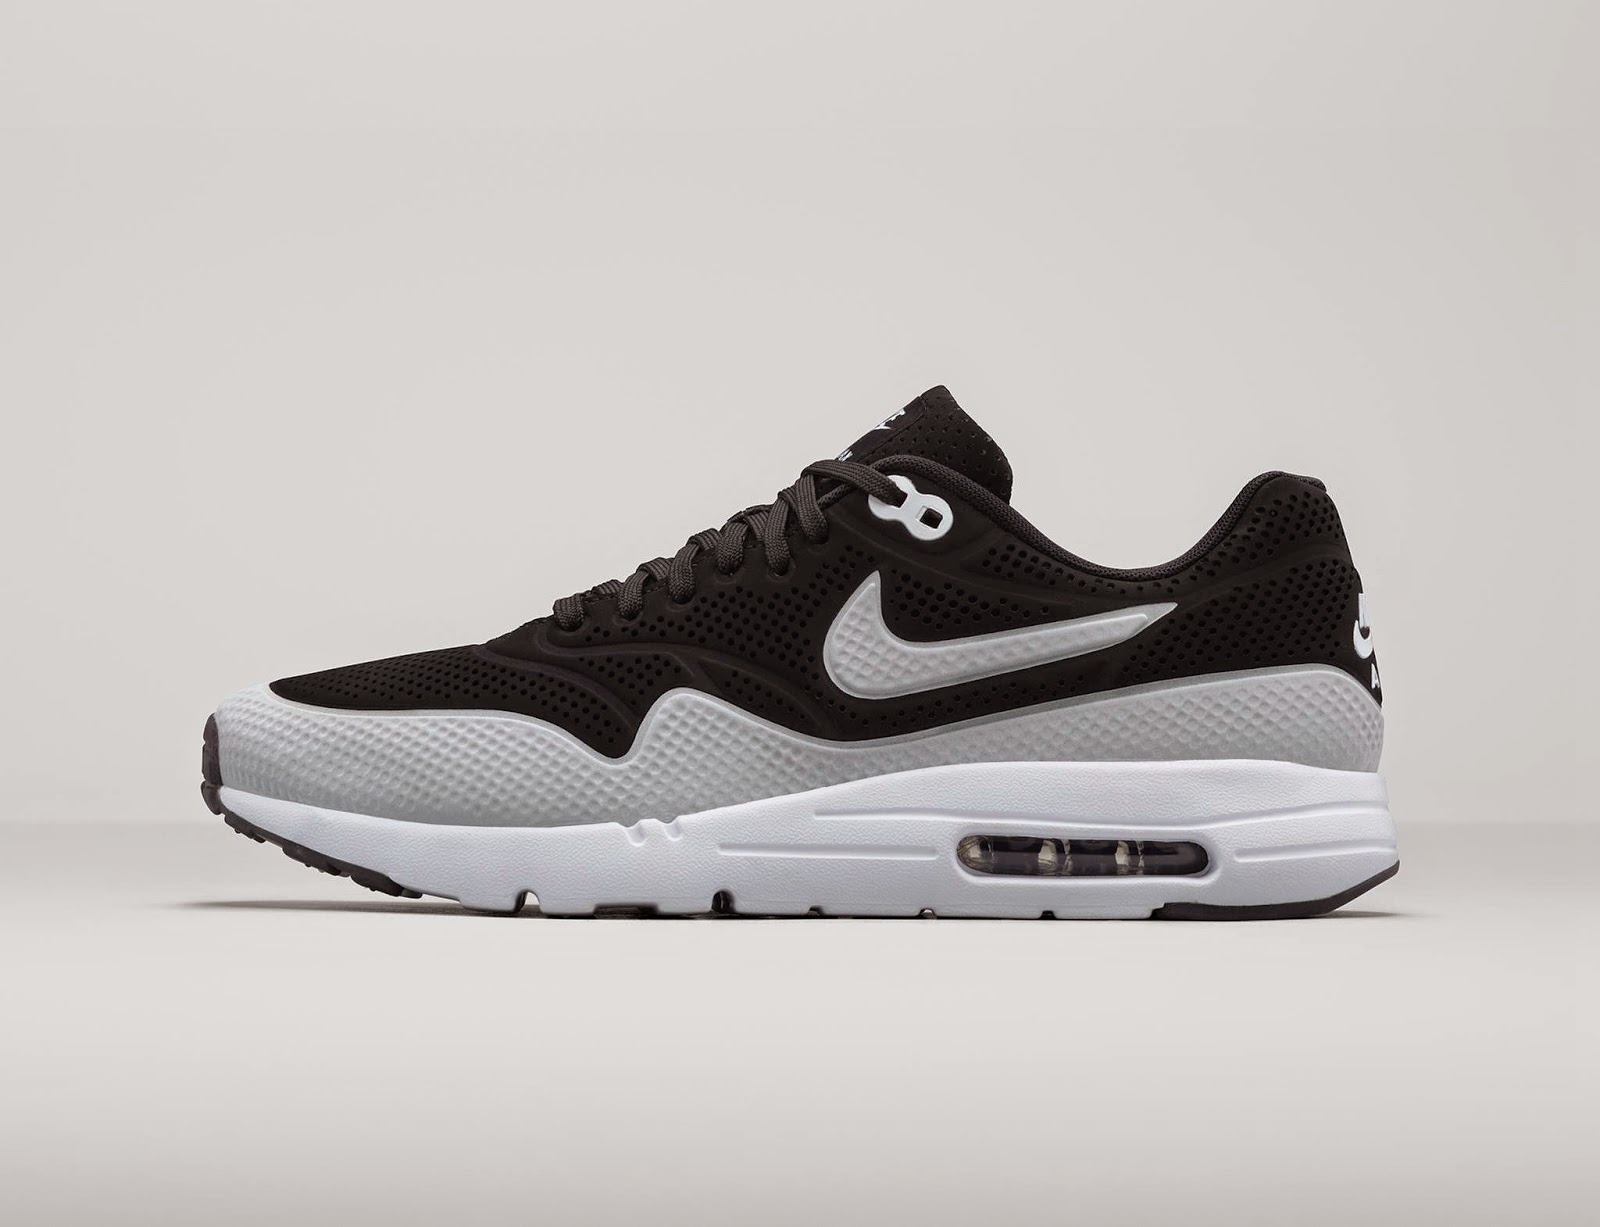 Swag Craze: Introducing the Nike Air Max 1 Ultra Moire - Ultra Light ...